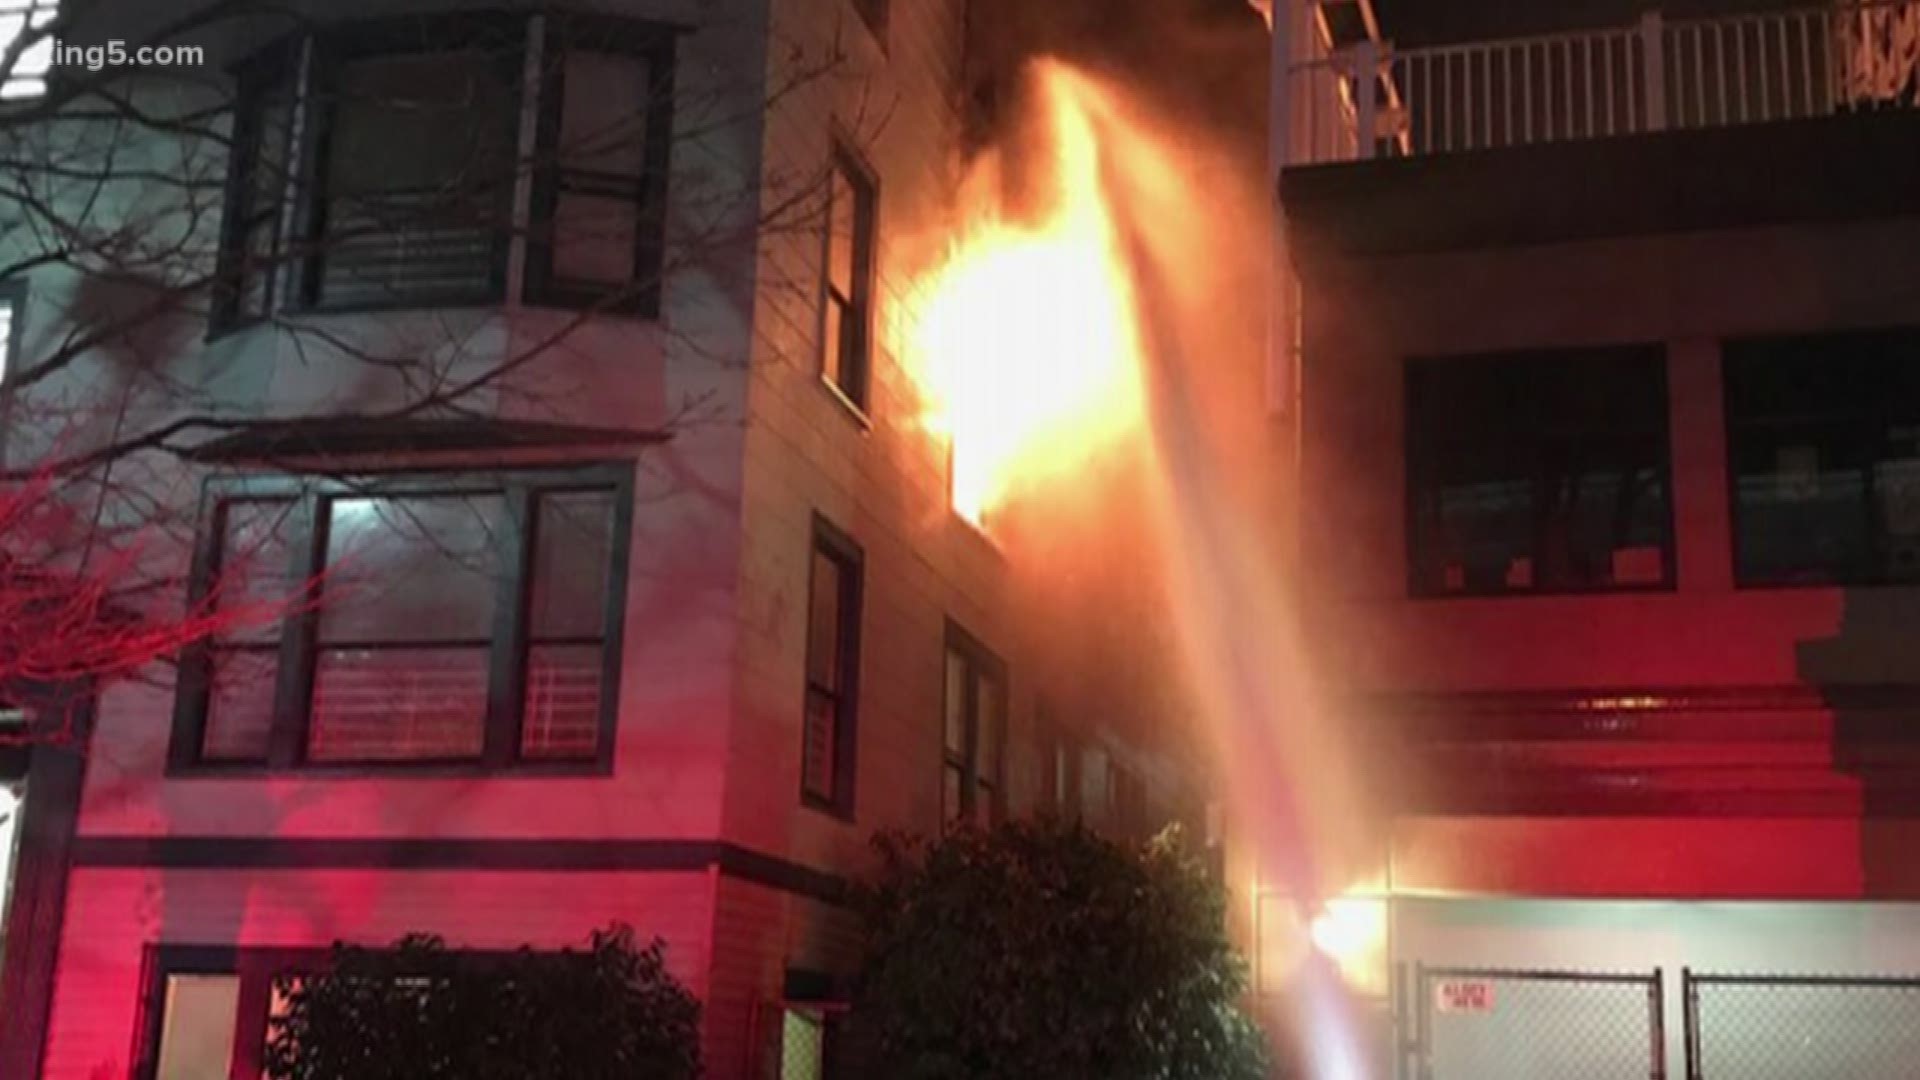 One person died in an overnight apartment fire on Yesler Way in Seattle.